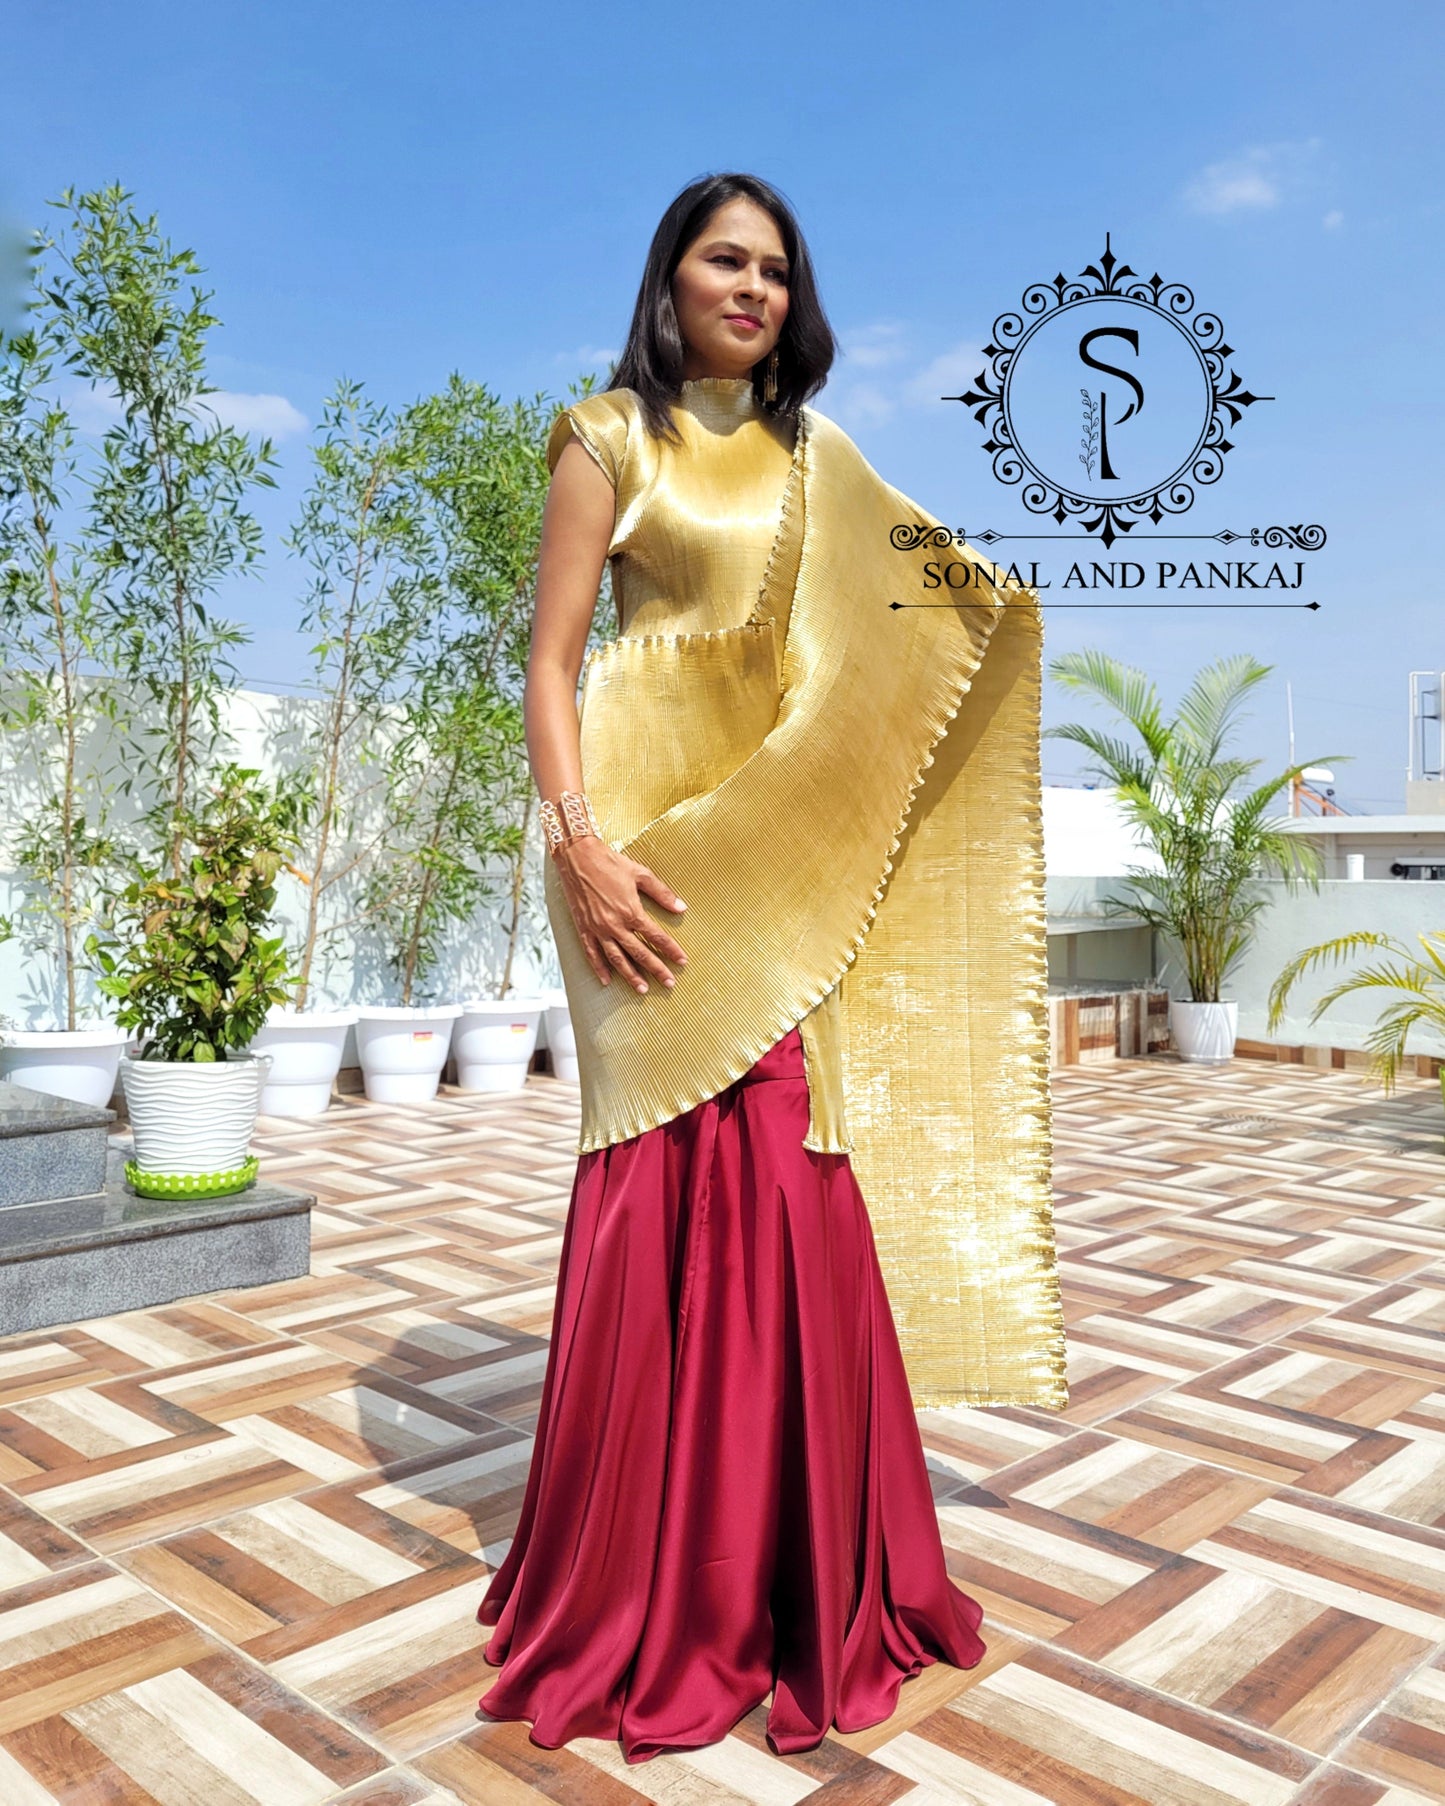 Metallic Pleated Top Style Blouse With Ready To Wear Saree - SAMPLE01188